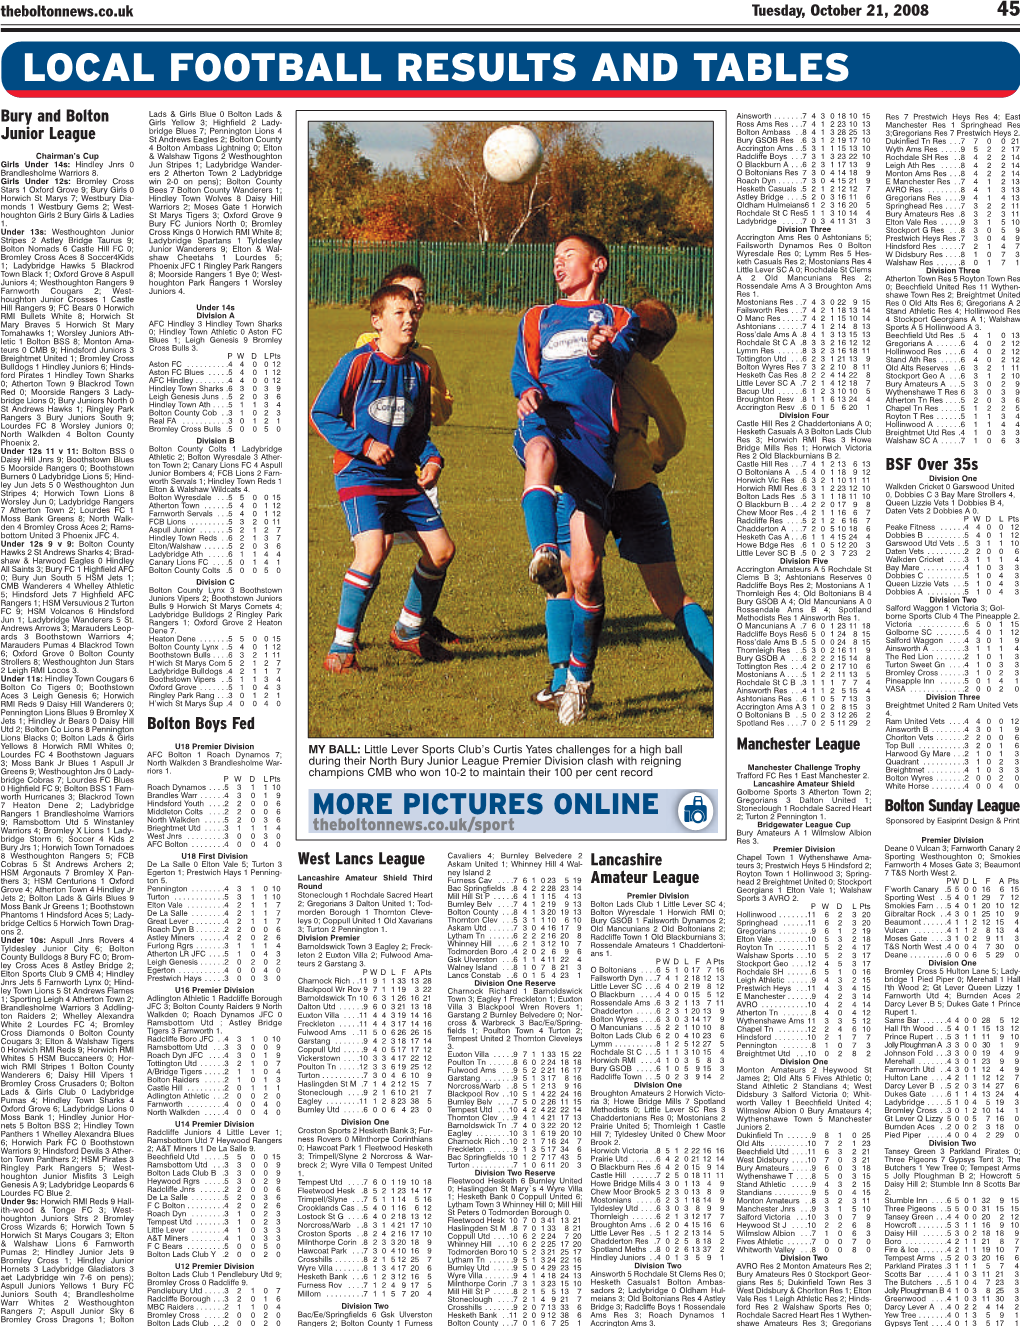 Local Football Results and Tables